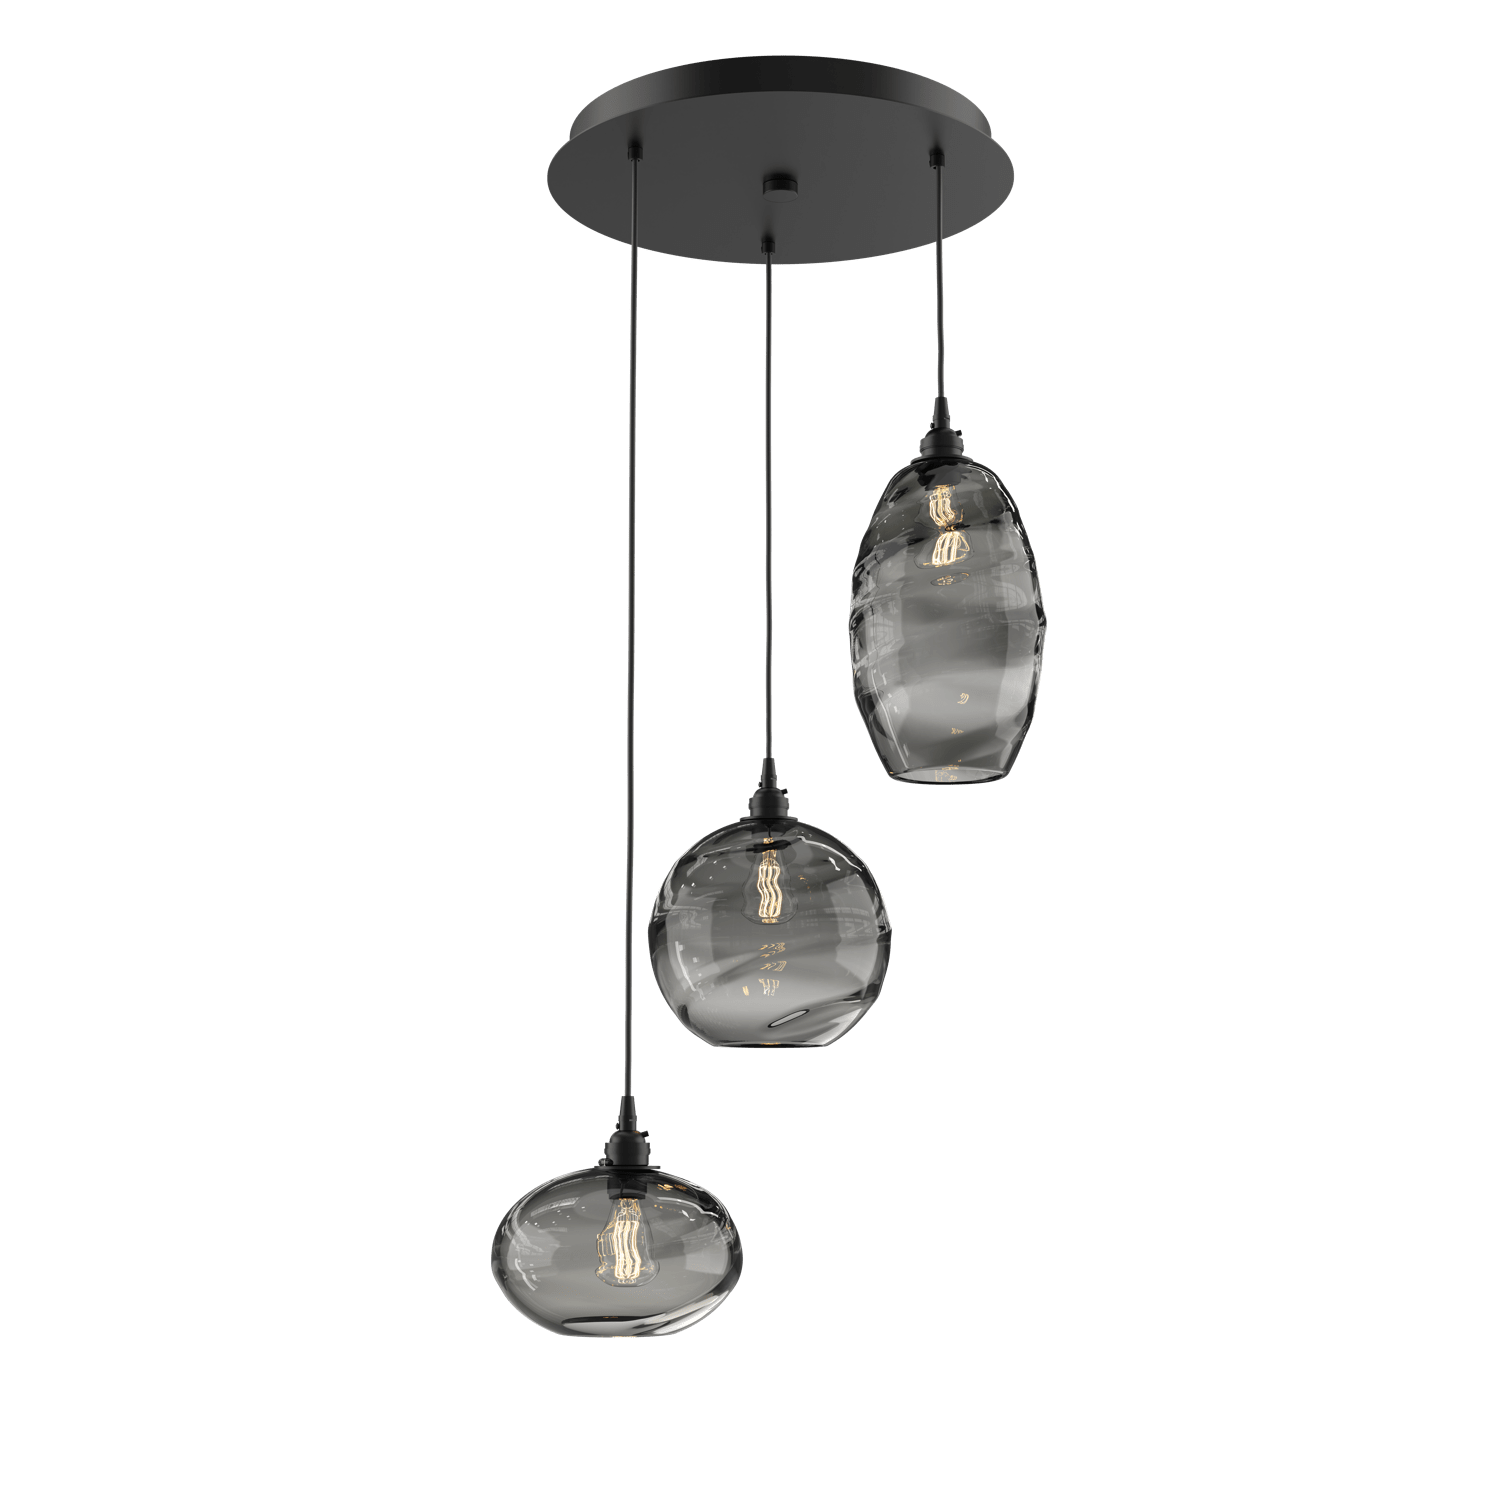 CHB0048-03-MB-OS-Hammerton-Studio-Optic-Blown-Glass-Misto-3-light-round-pendant-chandelier-with-matte-black-finish-and-optic-smoke-blown-glass-shades-and-incandescent-lamping